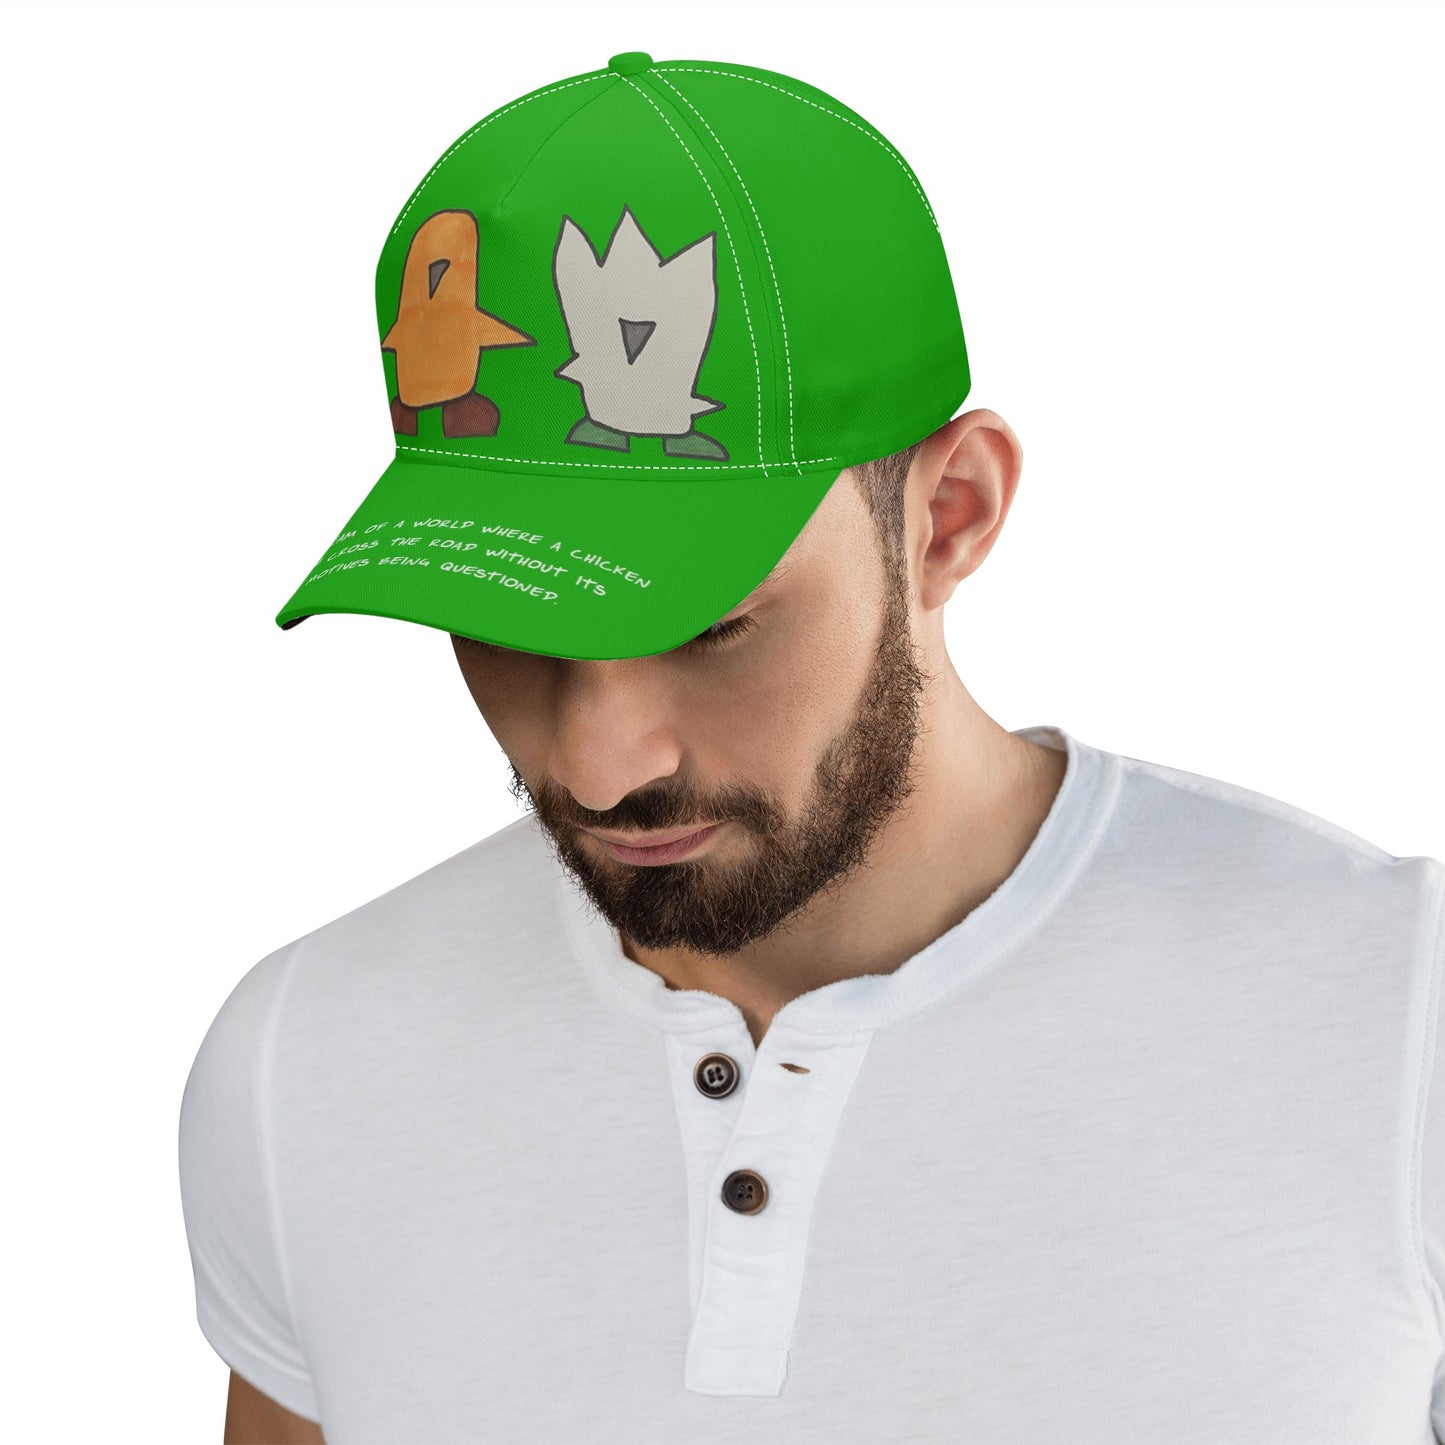 'I dream of a world' Baseball Cap with Fuzzy and Muffin artwork by DB in Green